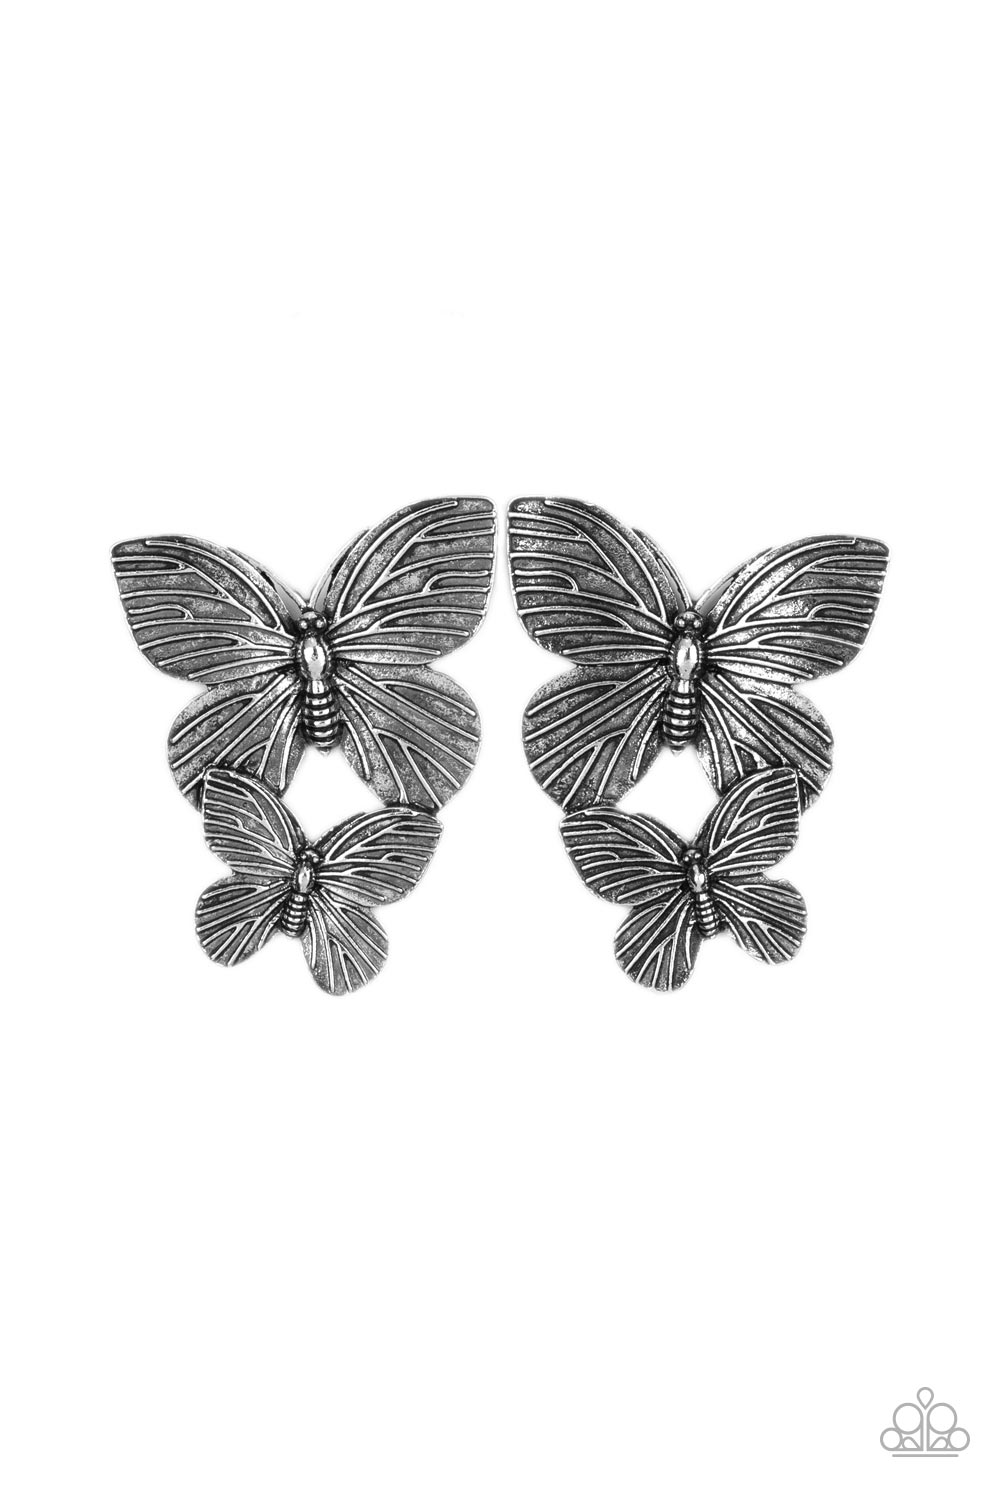 Blushing Butterflies - Silver Fashion Earrings - Paparazzi Accessories - Veined with lifelike textures, a pair of rustic silver butterflies flutters from the ear for a whimsical fashion stylish earrings. Trendy fashion jewelry for everyone.